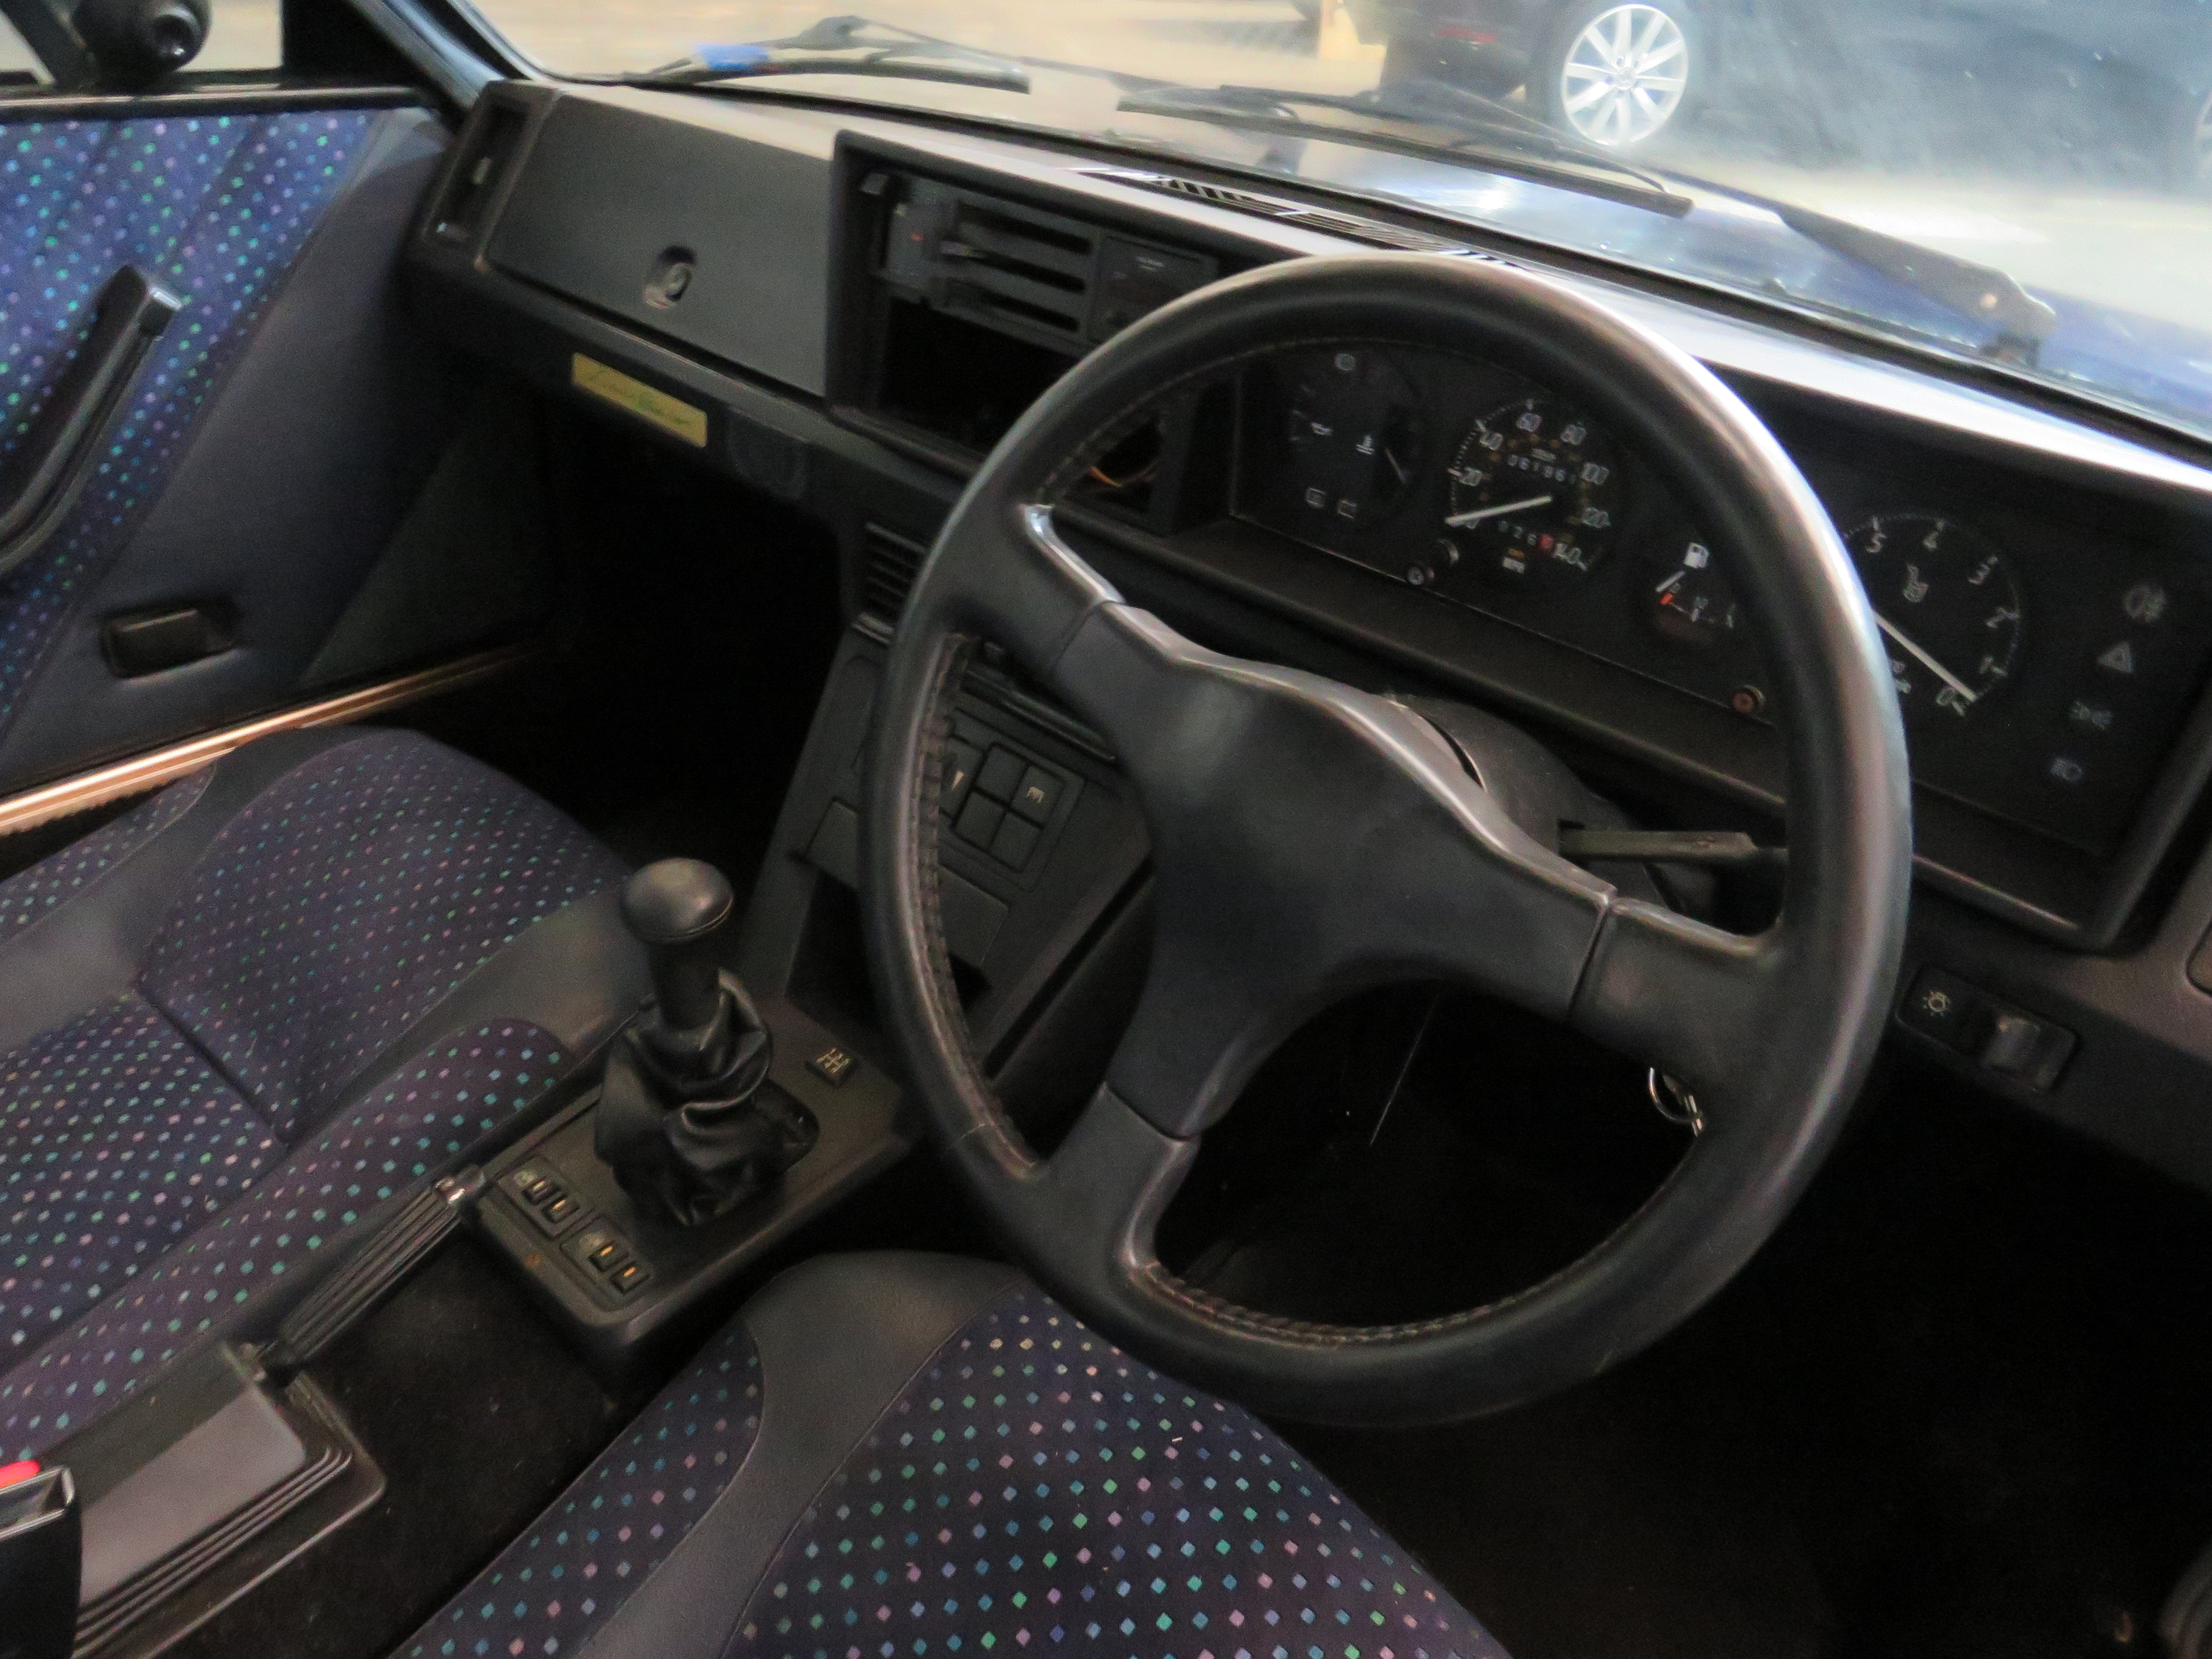 1989 Fiat X1/9 Gran Finale - 1498cc - ONE OWNER FROM NEW - Image 15 of 38